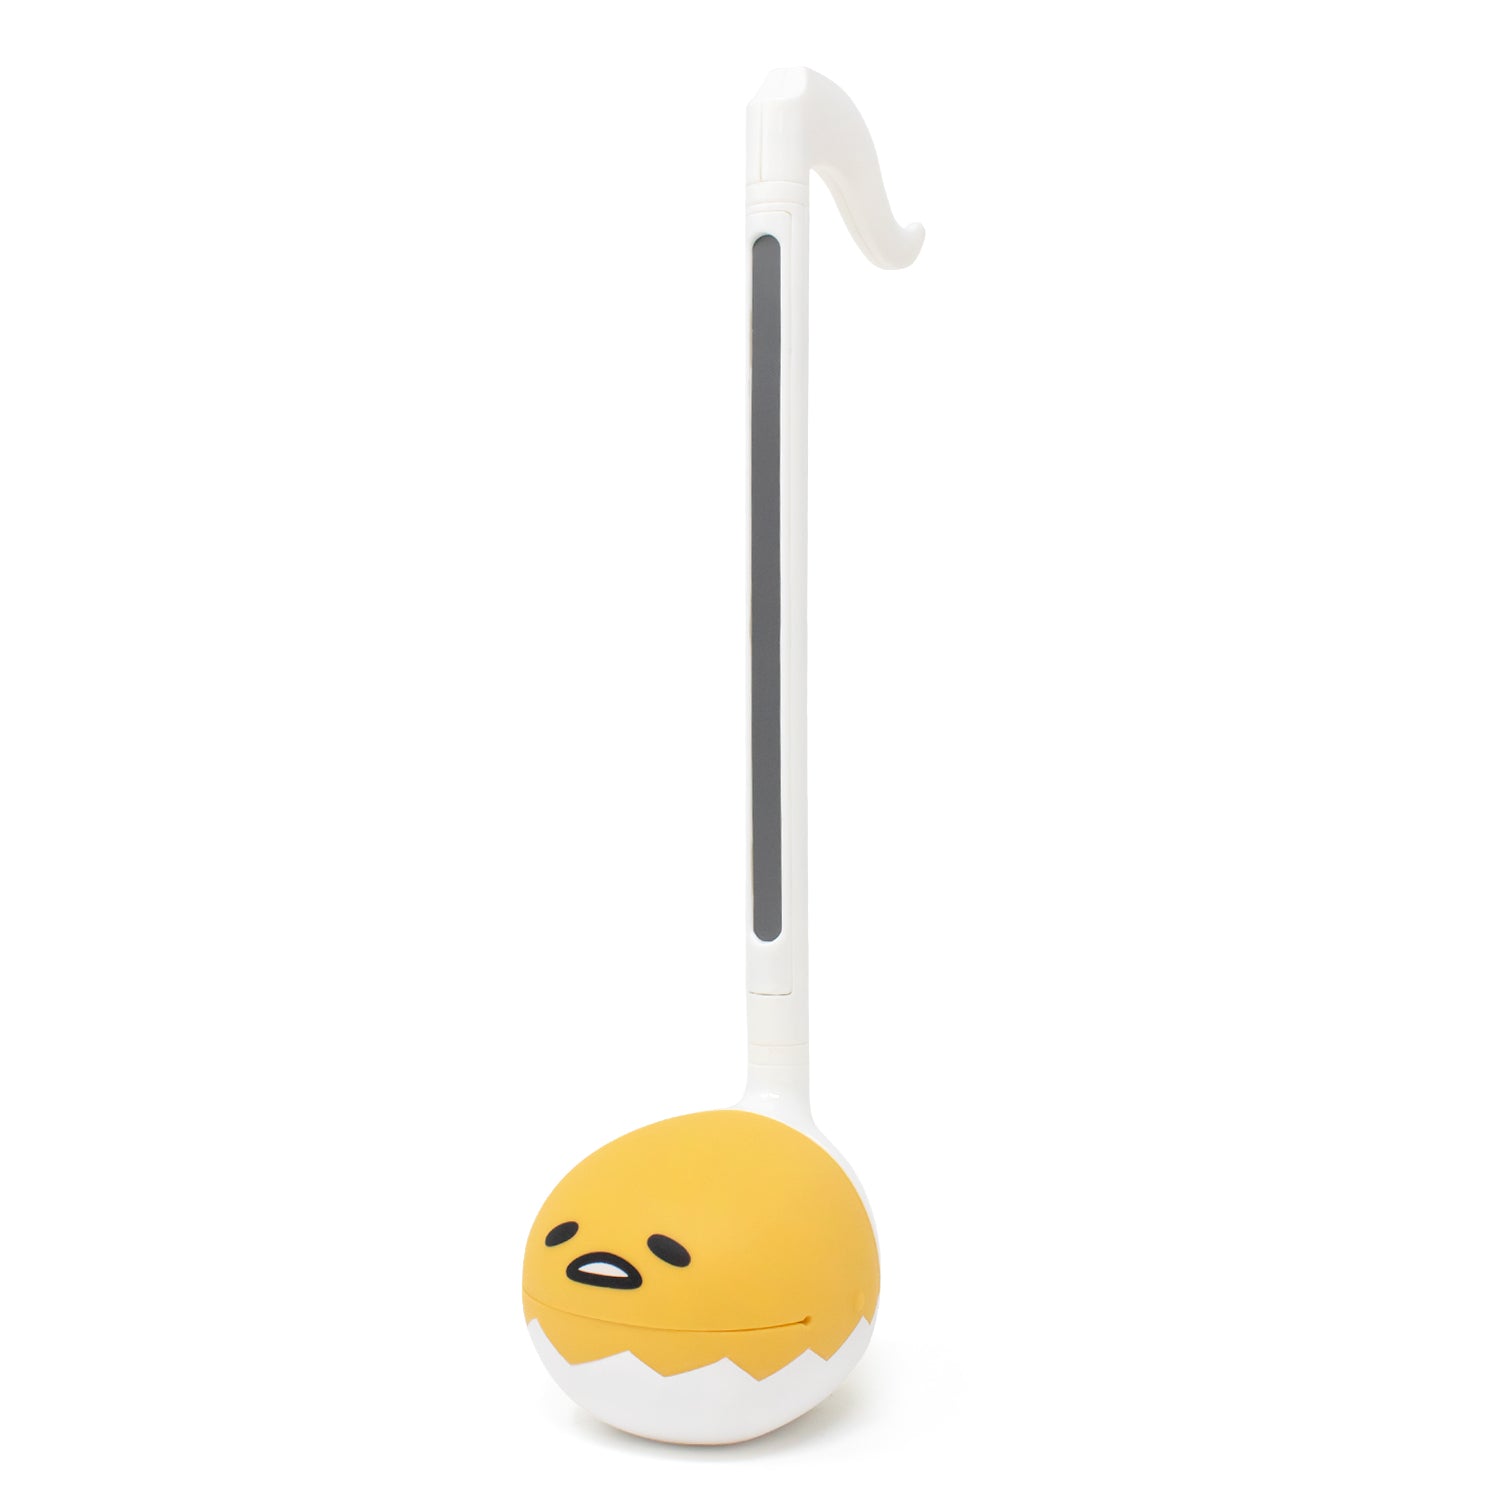 Otamatone Deluxe [Sanrio Gudetama] Electronic Musical Instrument Portable  Synthesizer from Japan by Cube/Maywa Denki from Japan